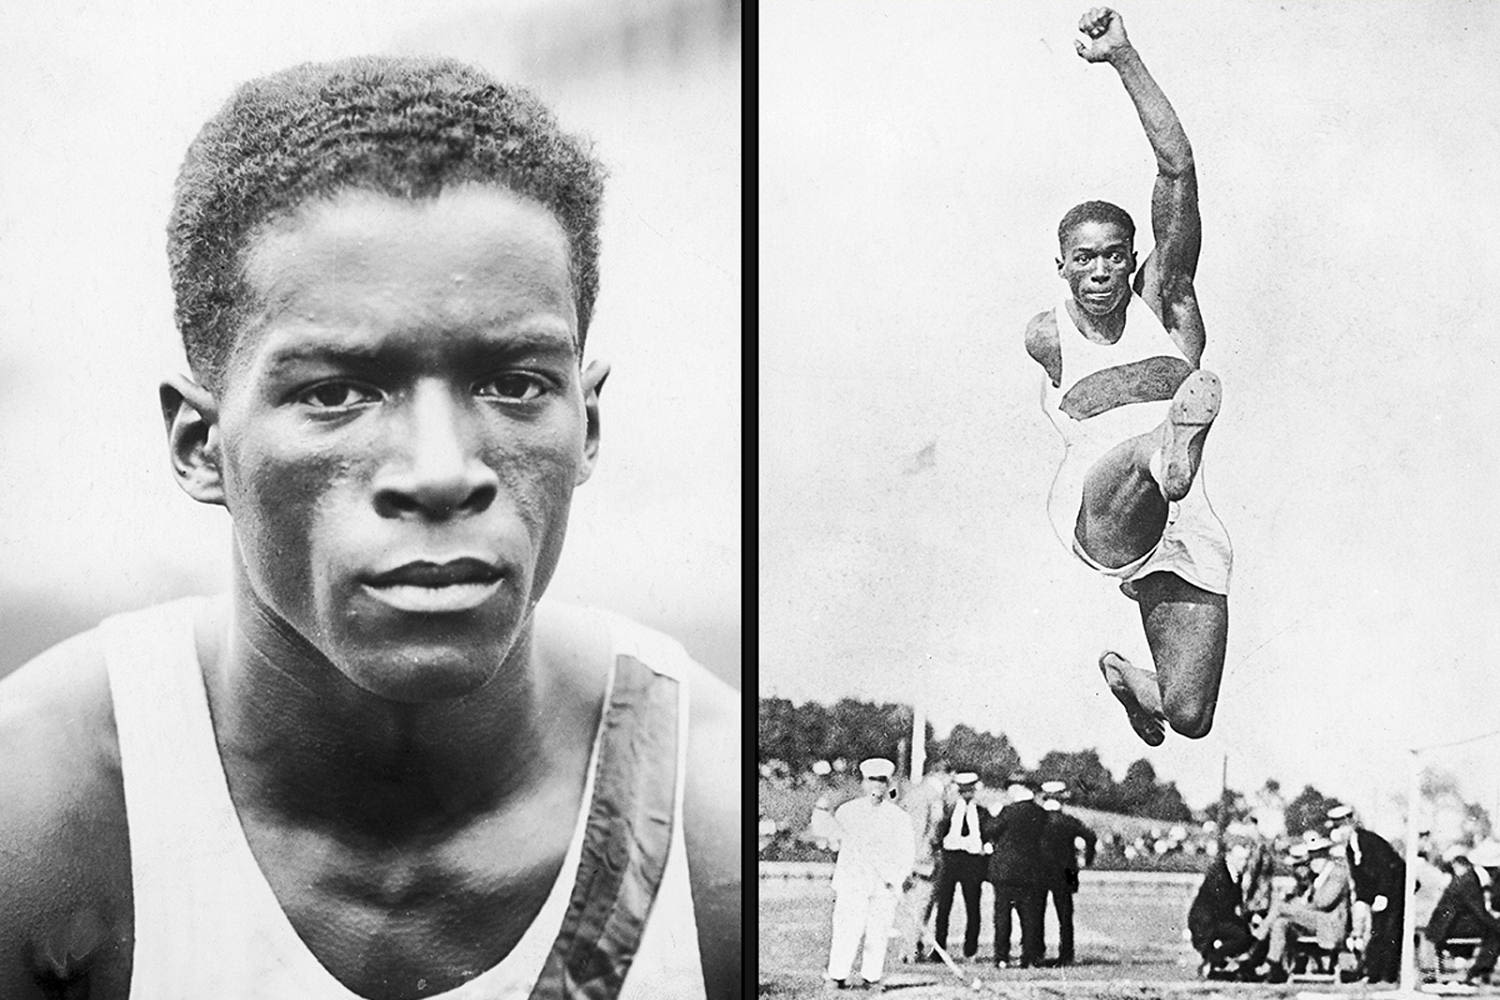 100 years ago, William DeHart Hubbard became the first Black athlete to win individual Olympic gold